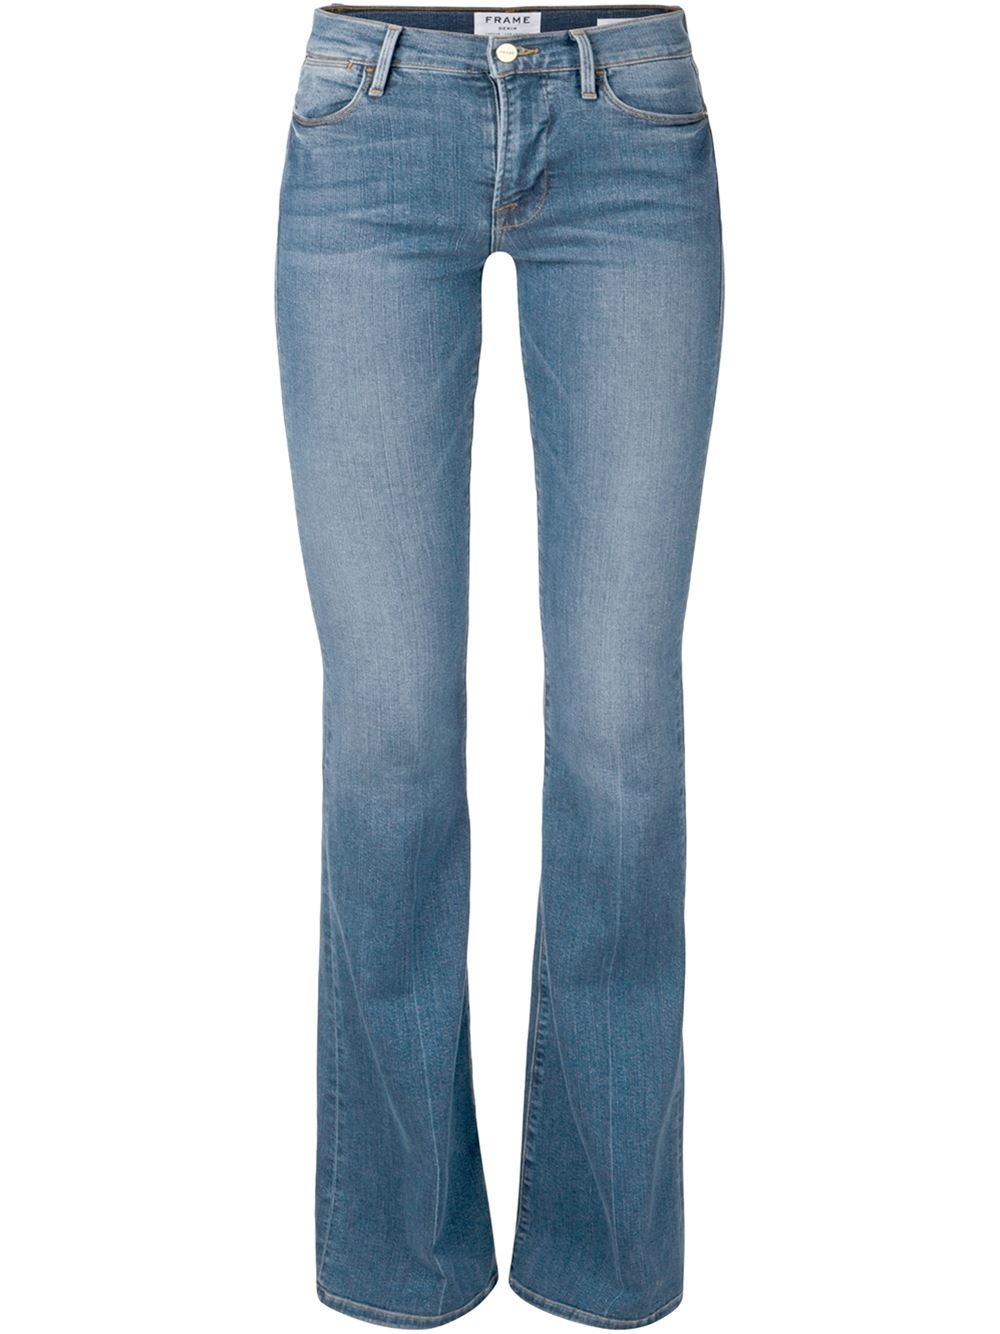 FRAME Denim Le High Flare Jeans in Blue - Lyst